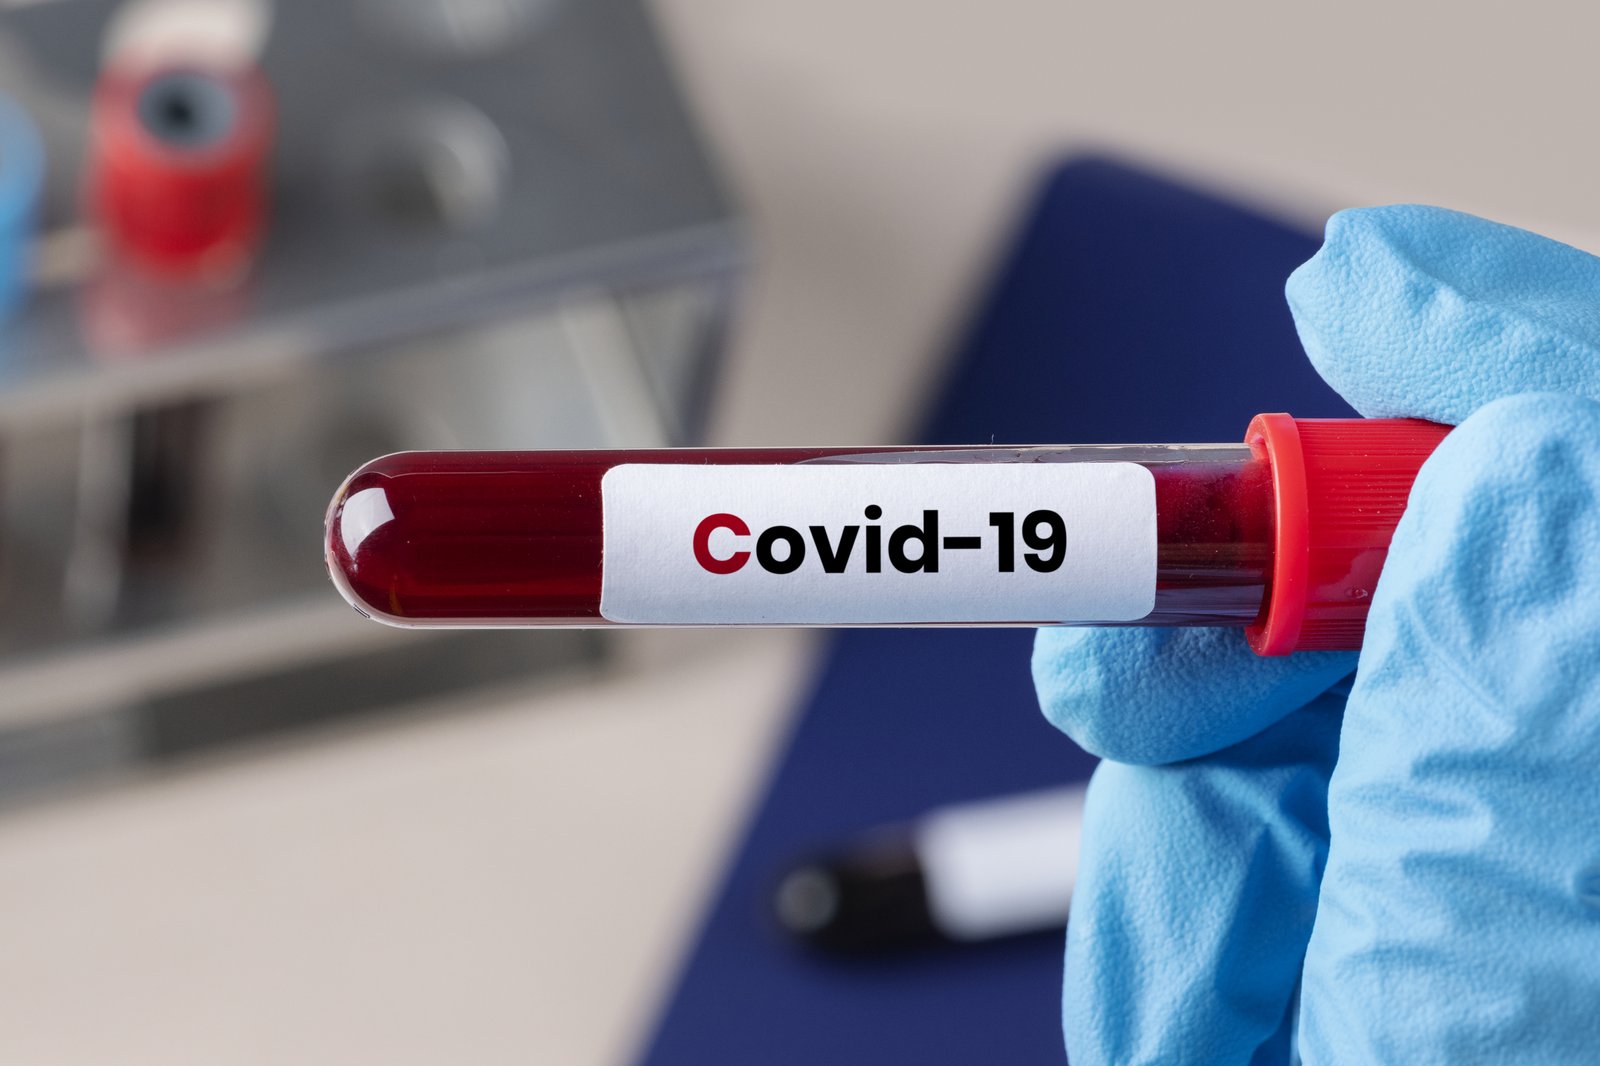 COVID-19 Virus Lingers In The Body More Than A Year After Infection: Studies